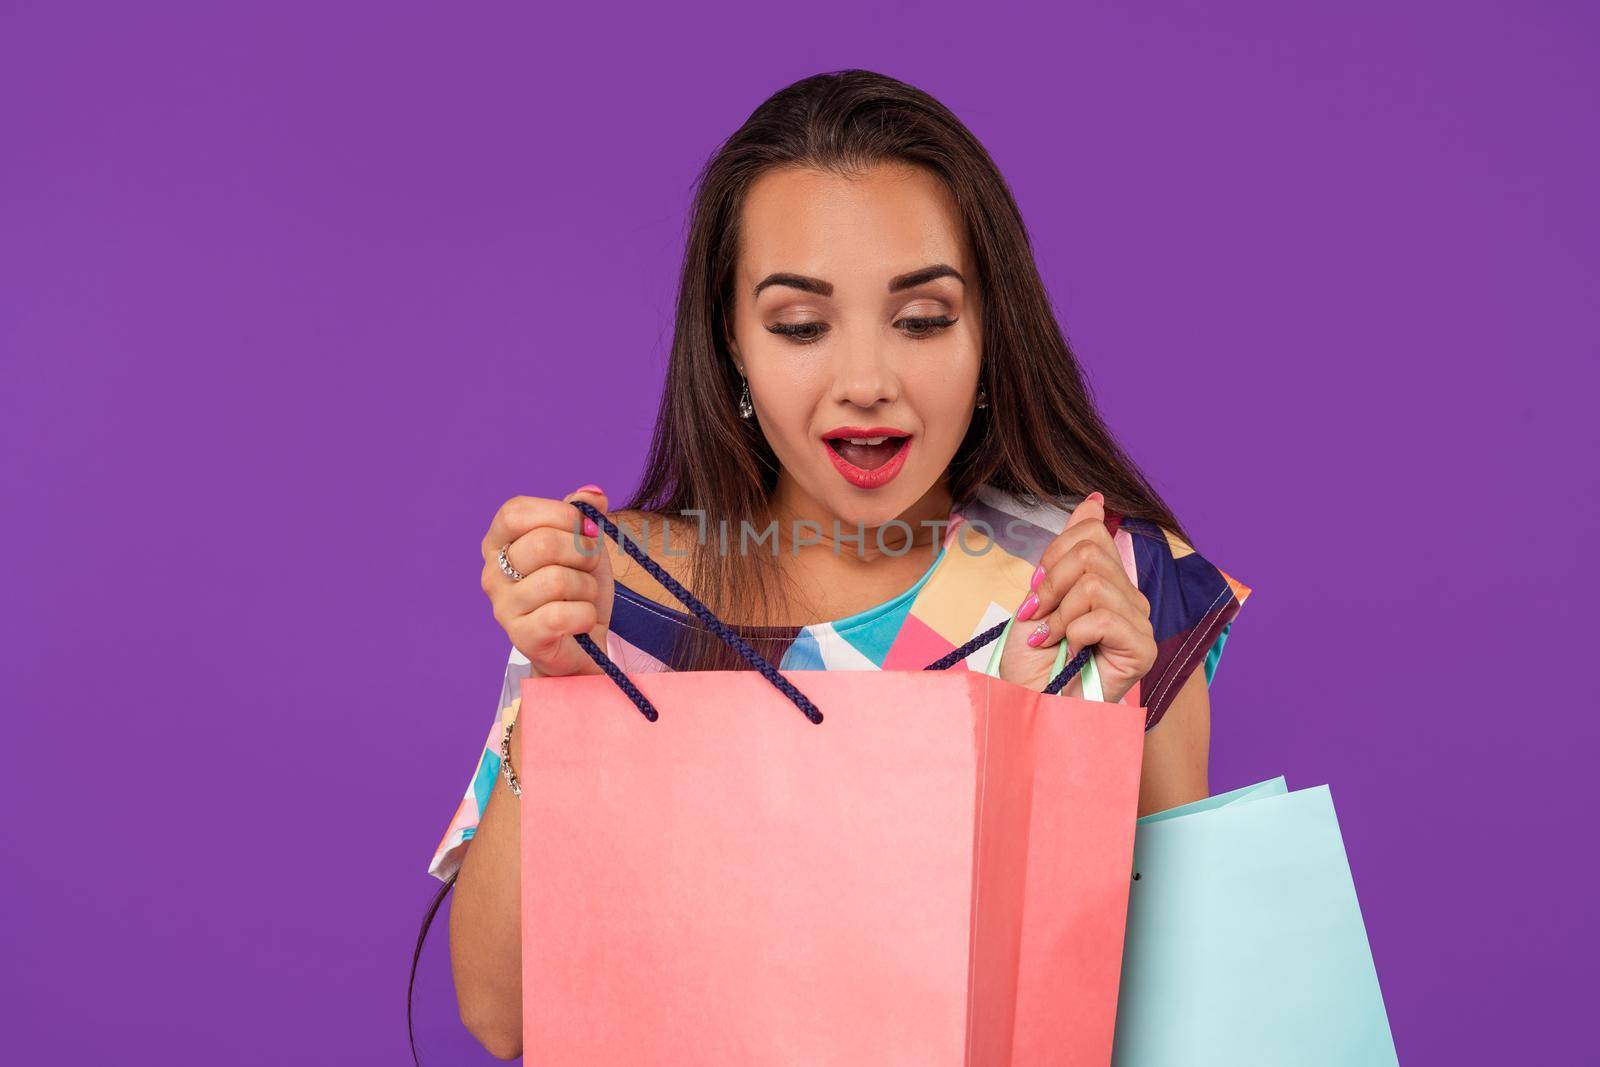 Beautiful emotional woman peeks into a package, in the hands of multi-colored shopping bags on a purple background. Studio shot. Copy space